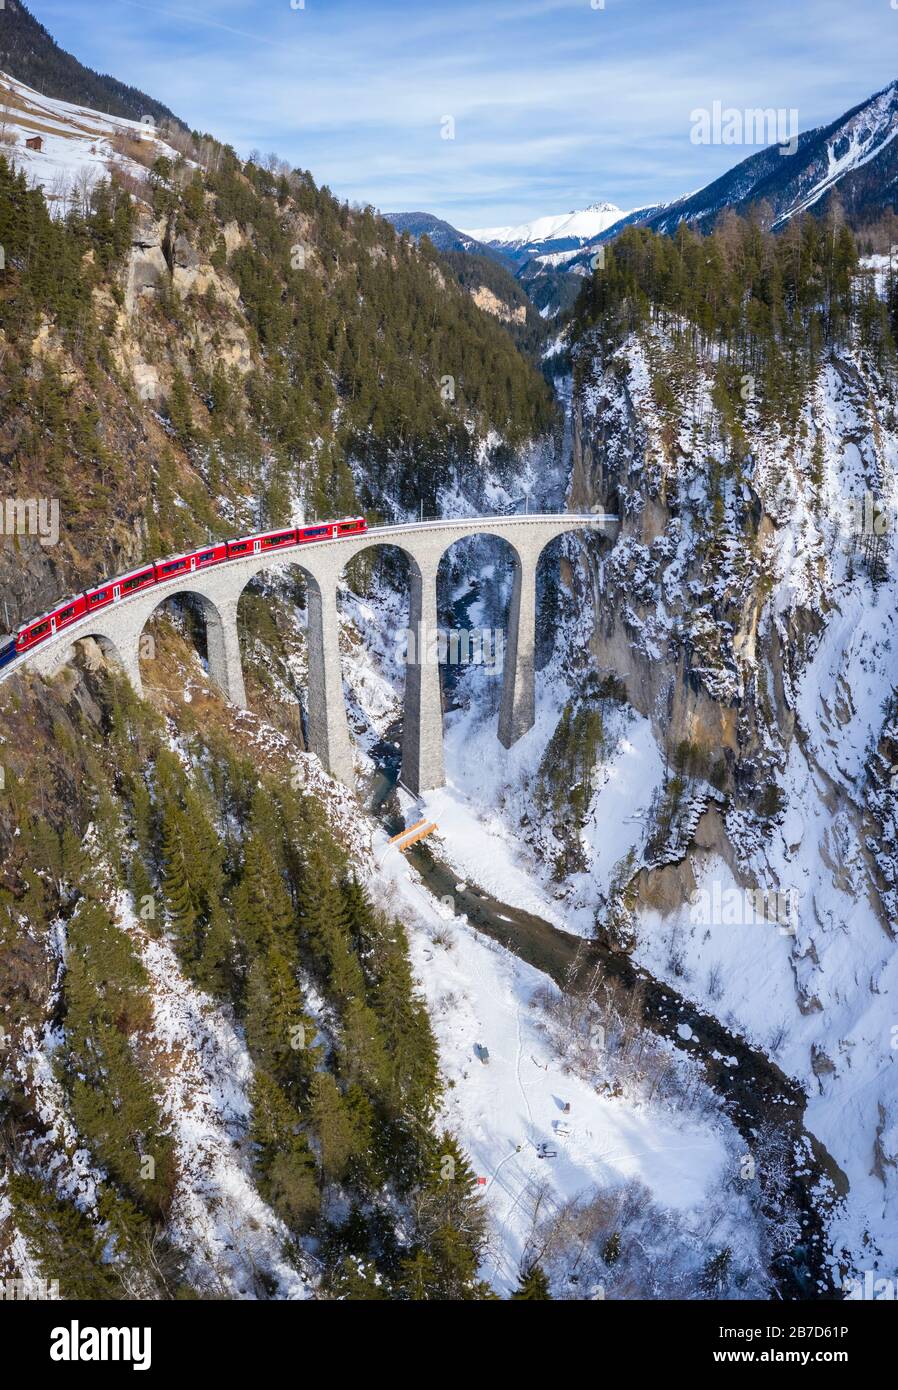 Aerial view of the famous Bernina Express passing over the Landwasser Viaduct. Filisur, Canton of Grisons, Switzerland, Europe. Stock Photo